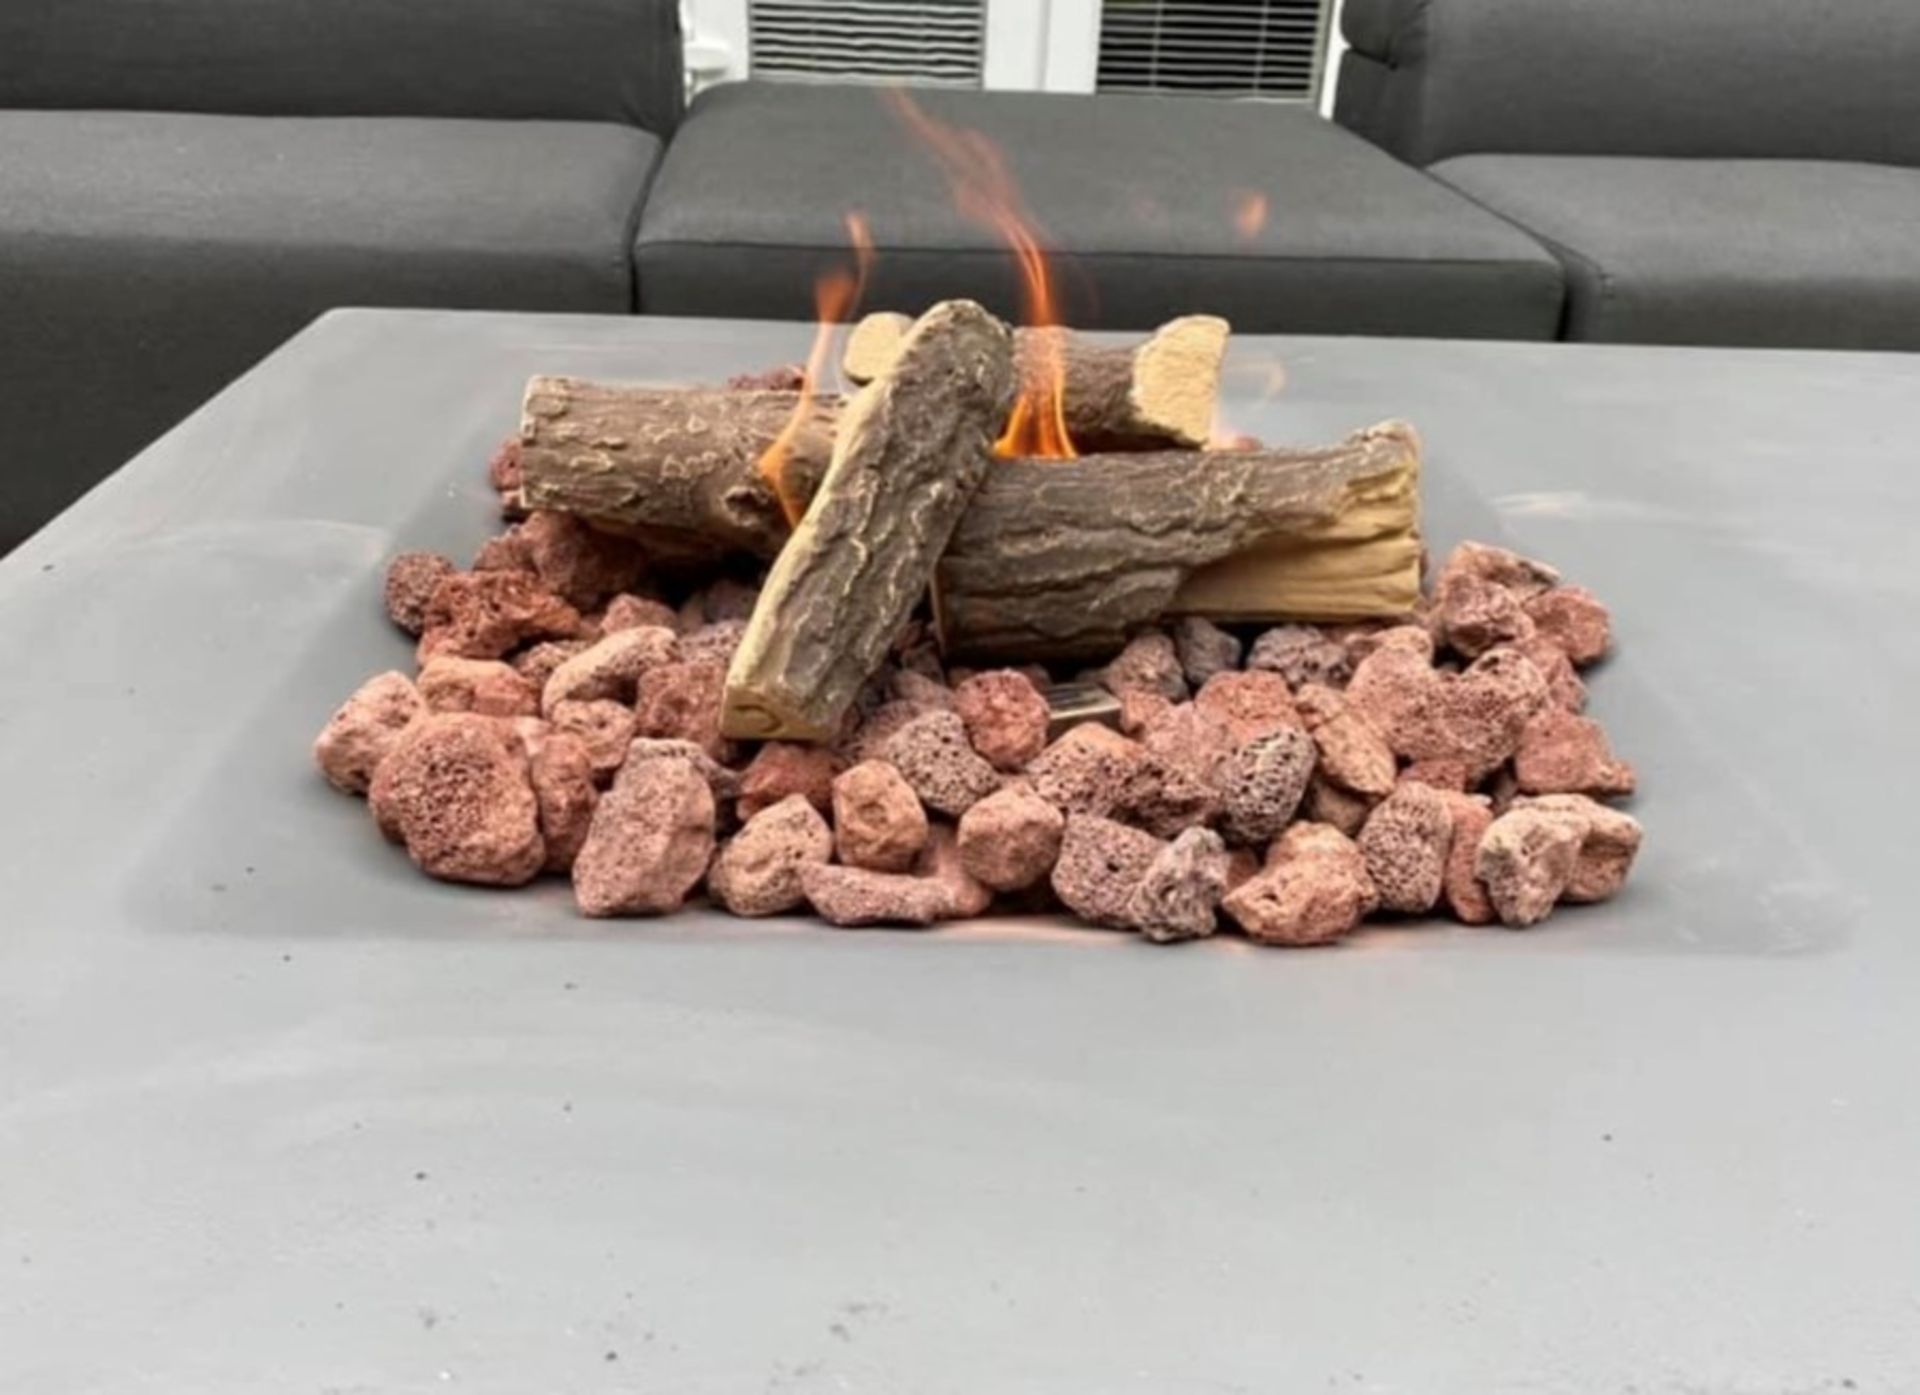 1x Concrete resin gas firepit around 80cm square cube size with storage for gas bottle inside